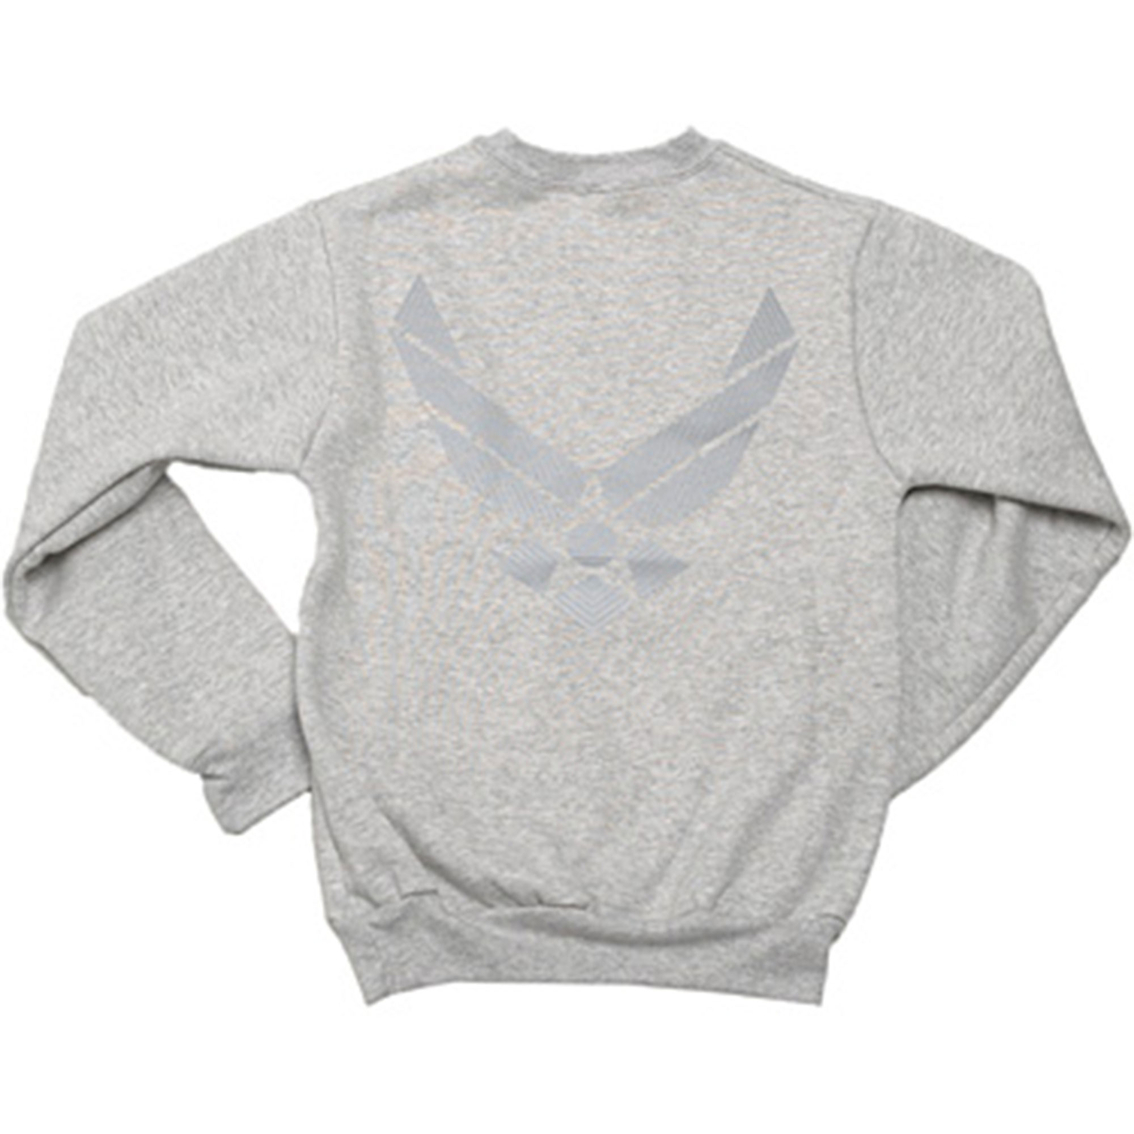 Air Force Pullover Sweatshirt - Image 2 of 2